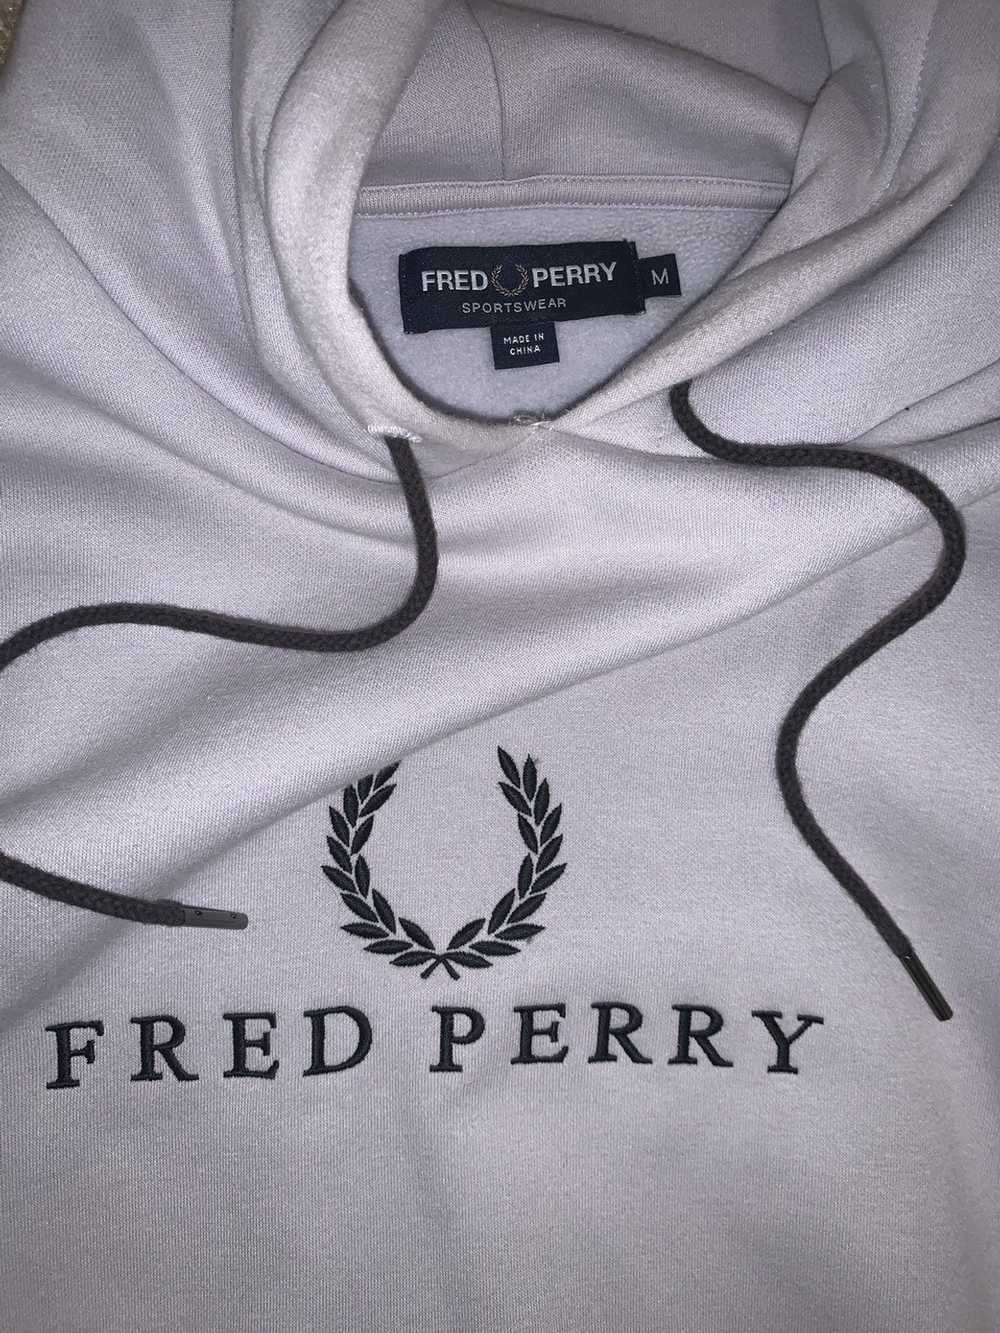 Fred Perry Fred Perry hoodie - image 2